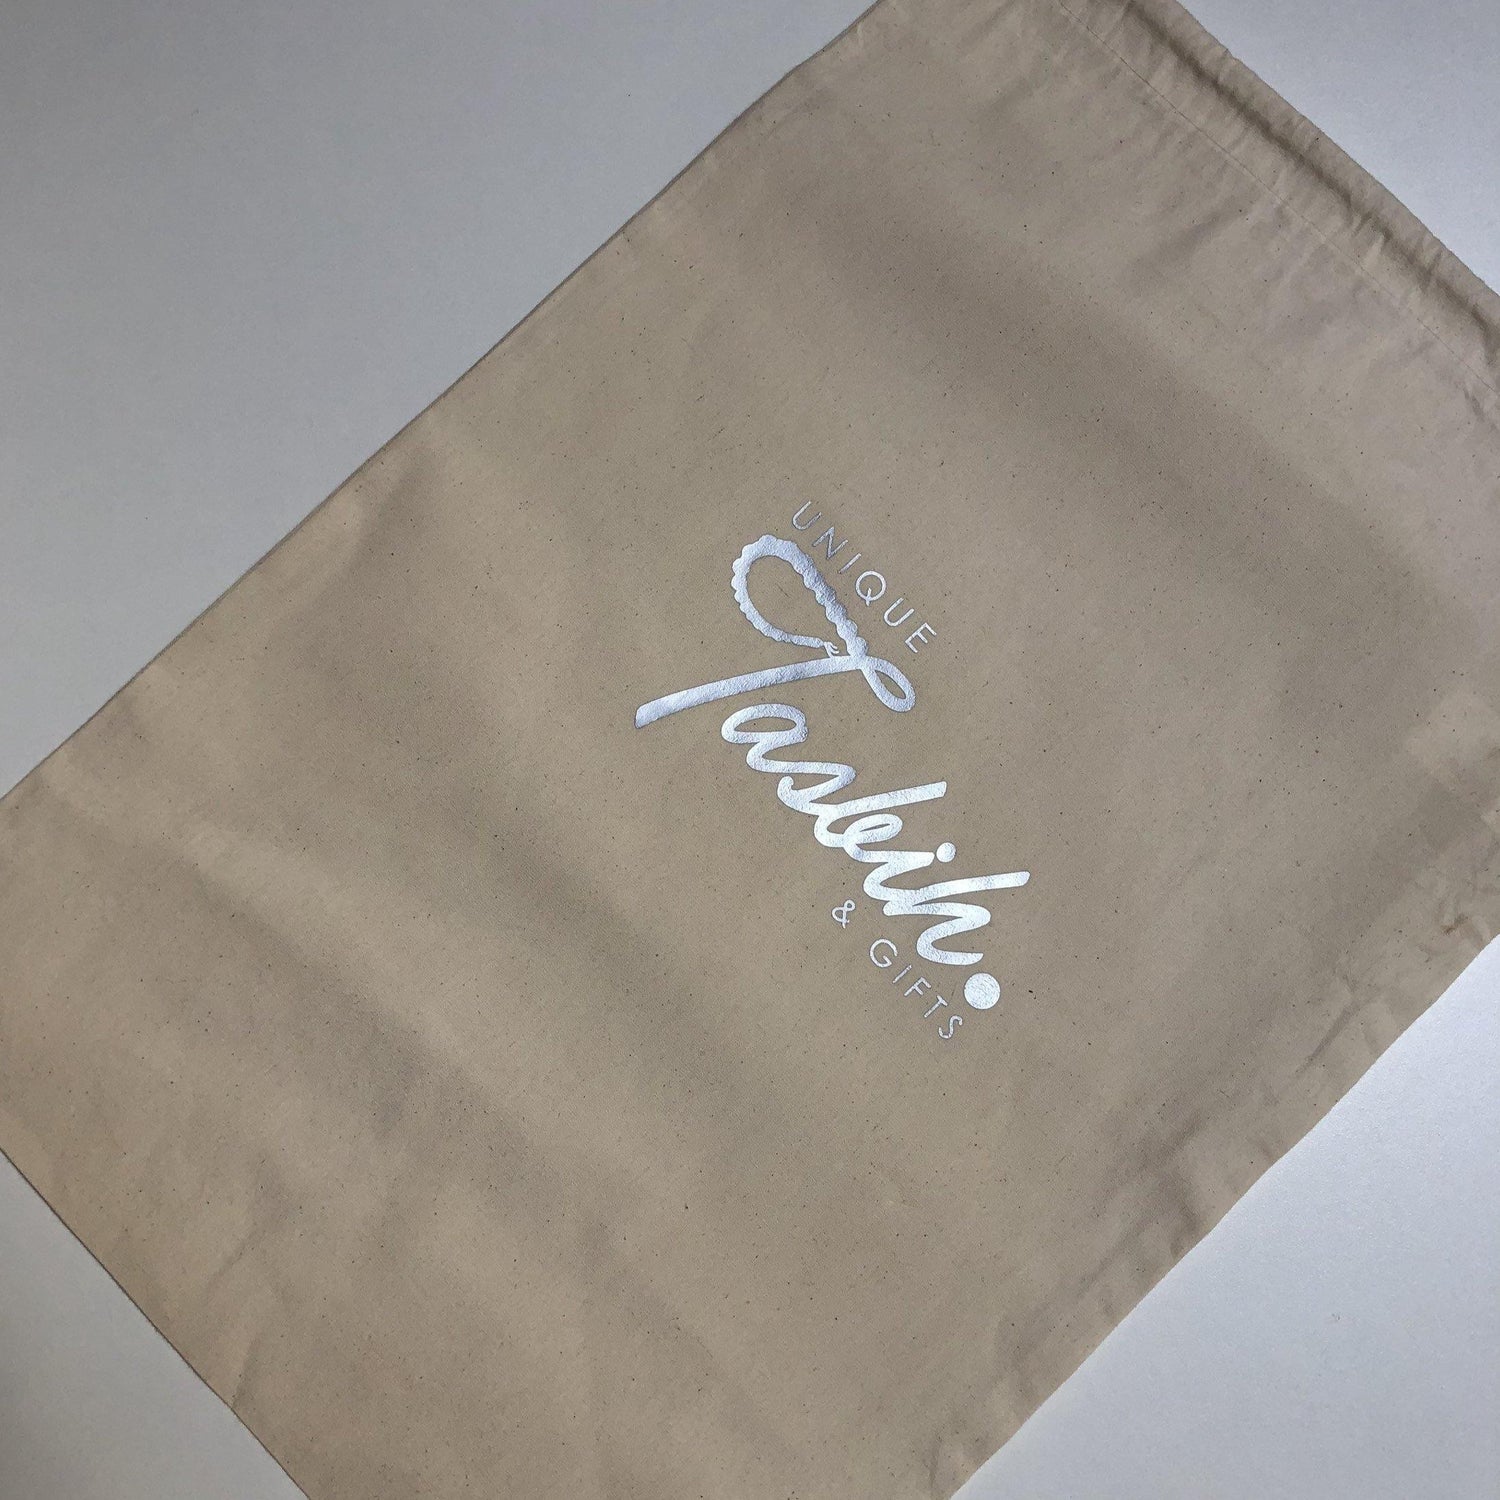 Cotton bag with logo - Unique Tasbihs & Gifts